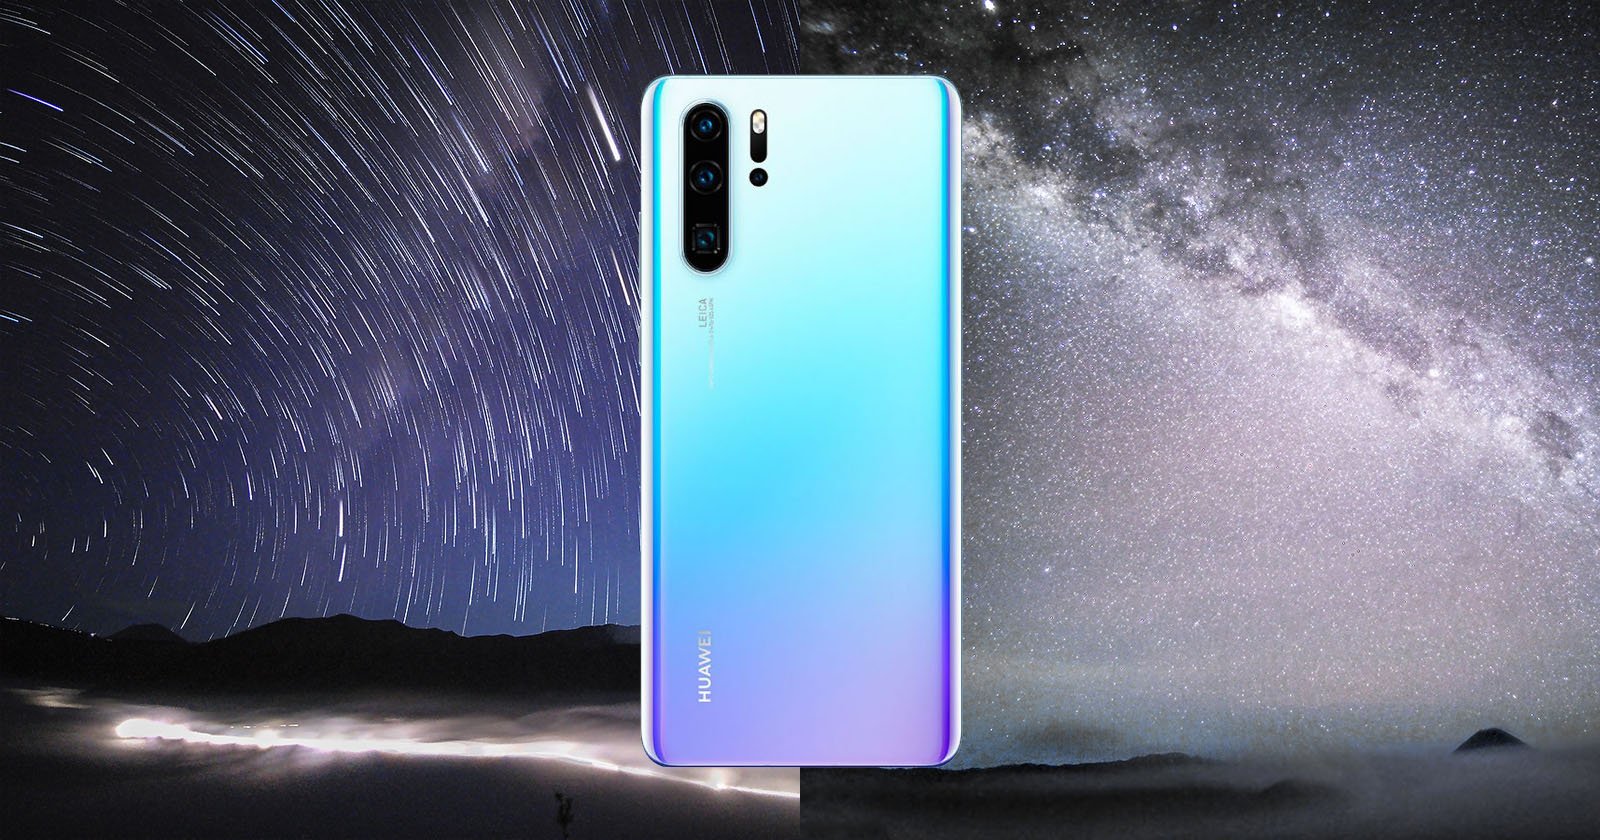 Yes, The Huawei P30 Pro Can Shoot the Milky Way (and Even Meteors)